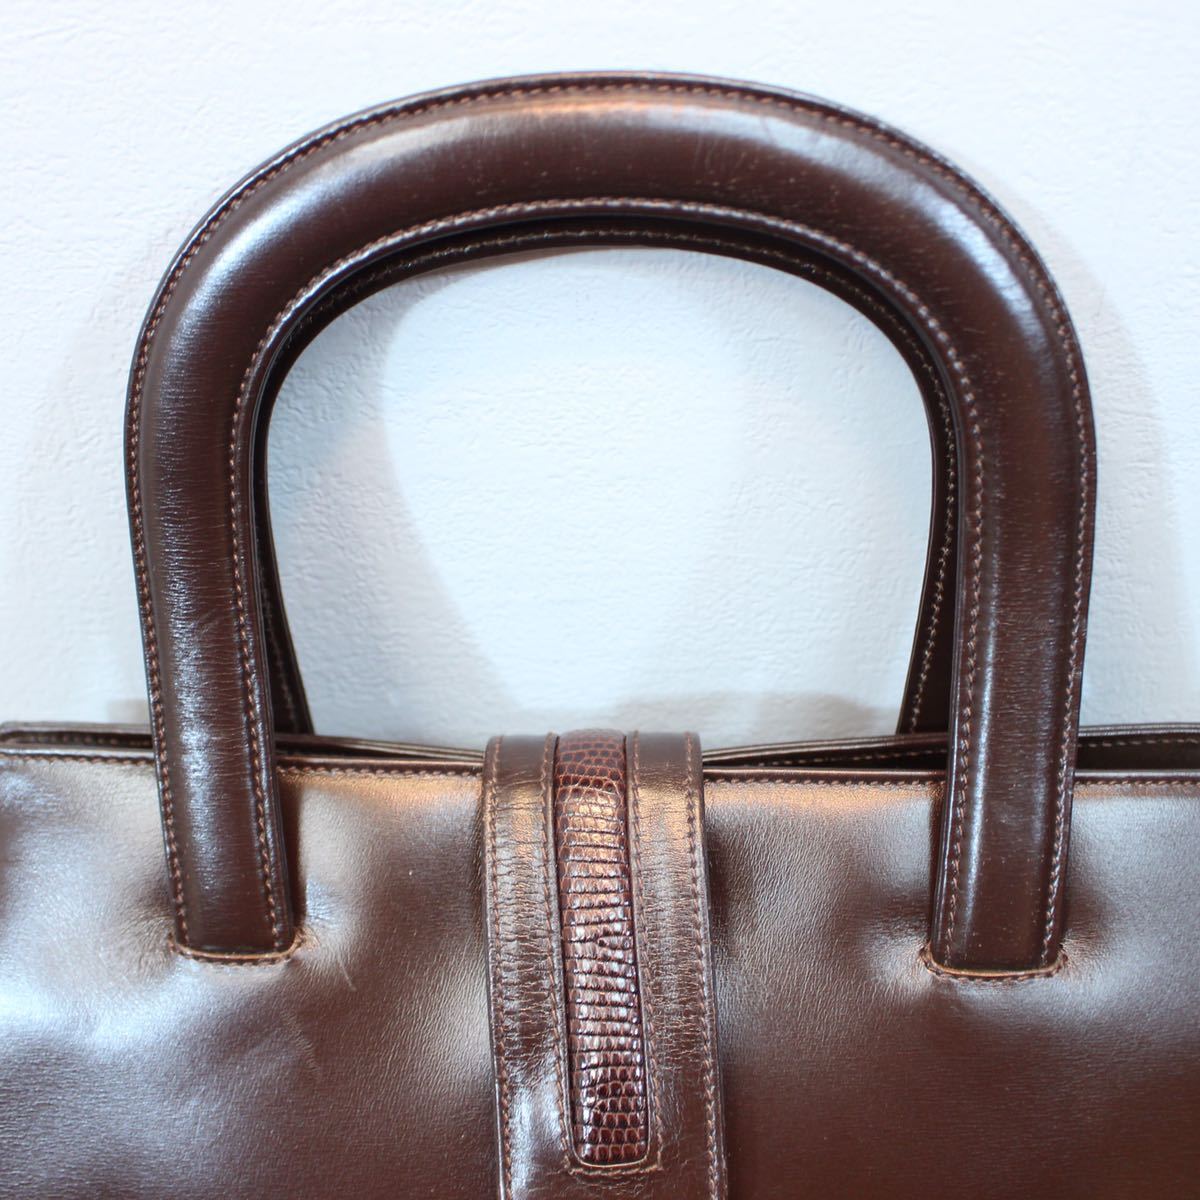 OLD GUCCI LEATHER HAND BAG MADE IN ITALY/オールドグッチレザーハンドバッグ